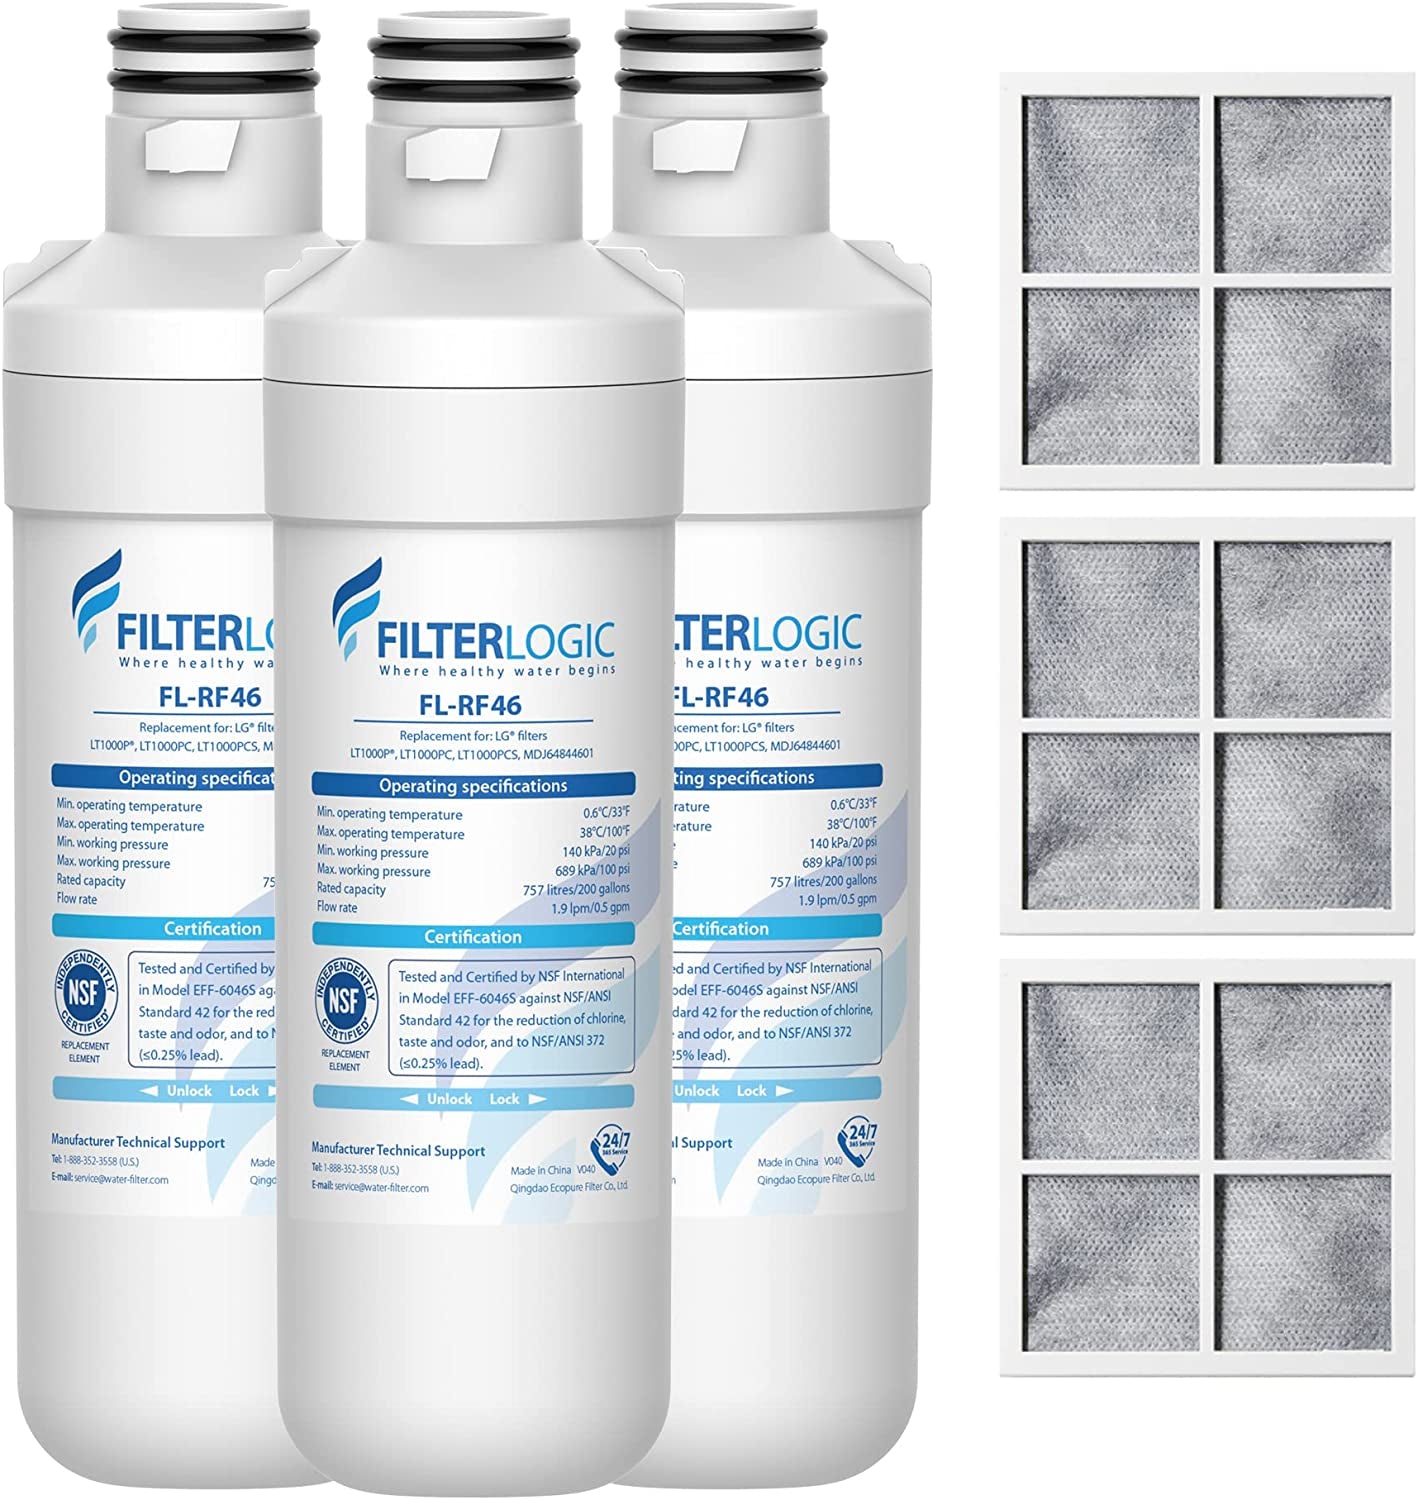 Filterlogic, Filterlogic LT1000PC ADQ747935 MDJ64844601 NSF Certified Refrigerator Water Filter and Air Filter, Replacement for LG® LT1000P®, LT1000PC, LT-1000PC MDJ64844601 and LT120F®, 3 Combo, Package May Vary